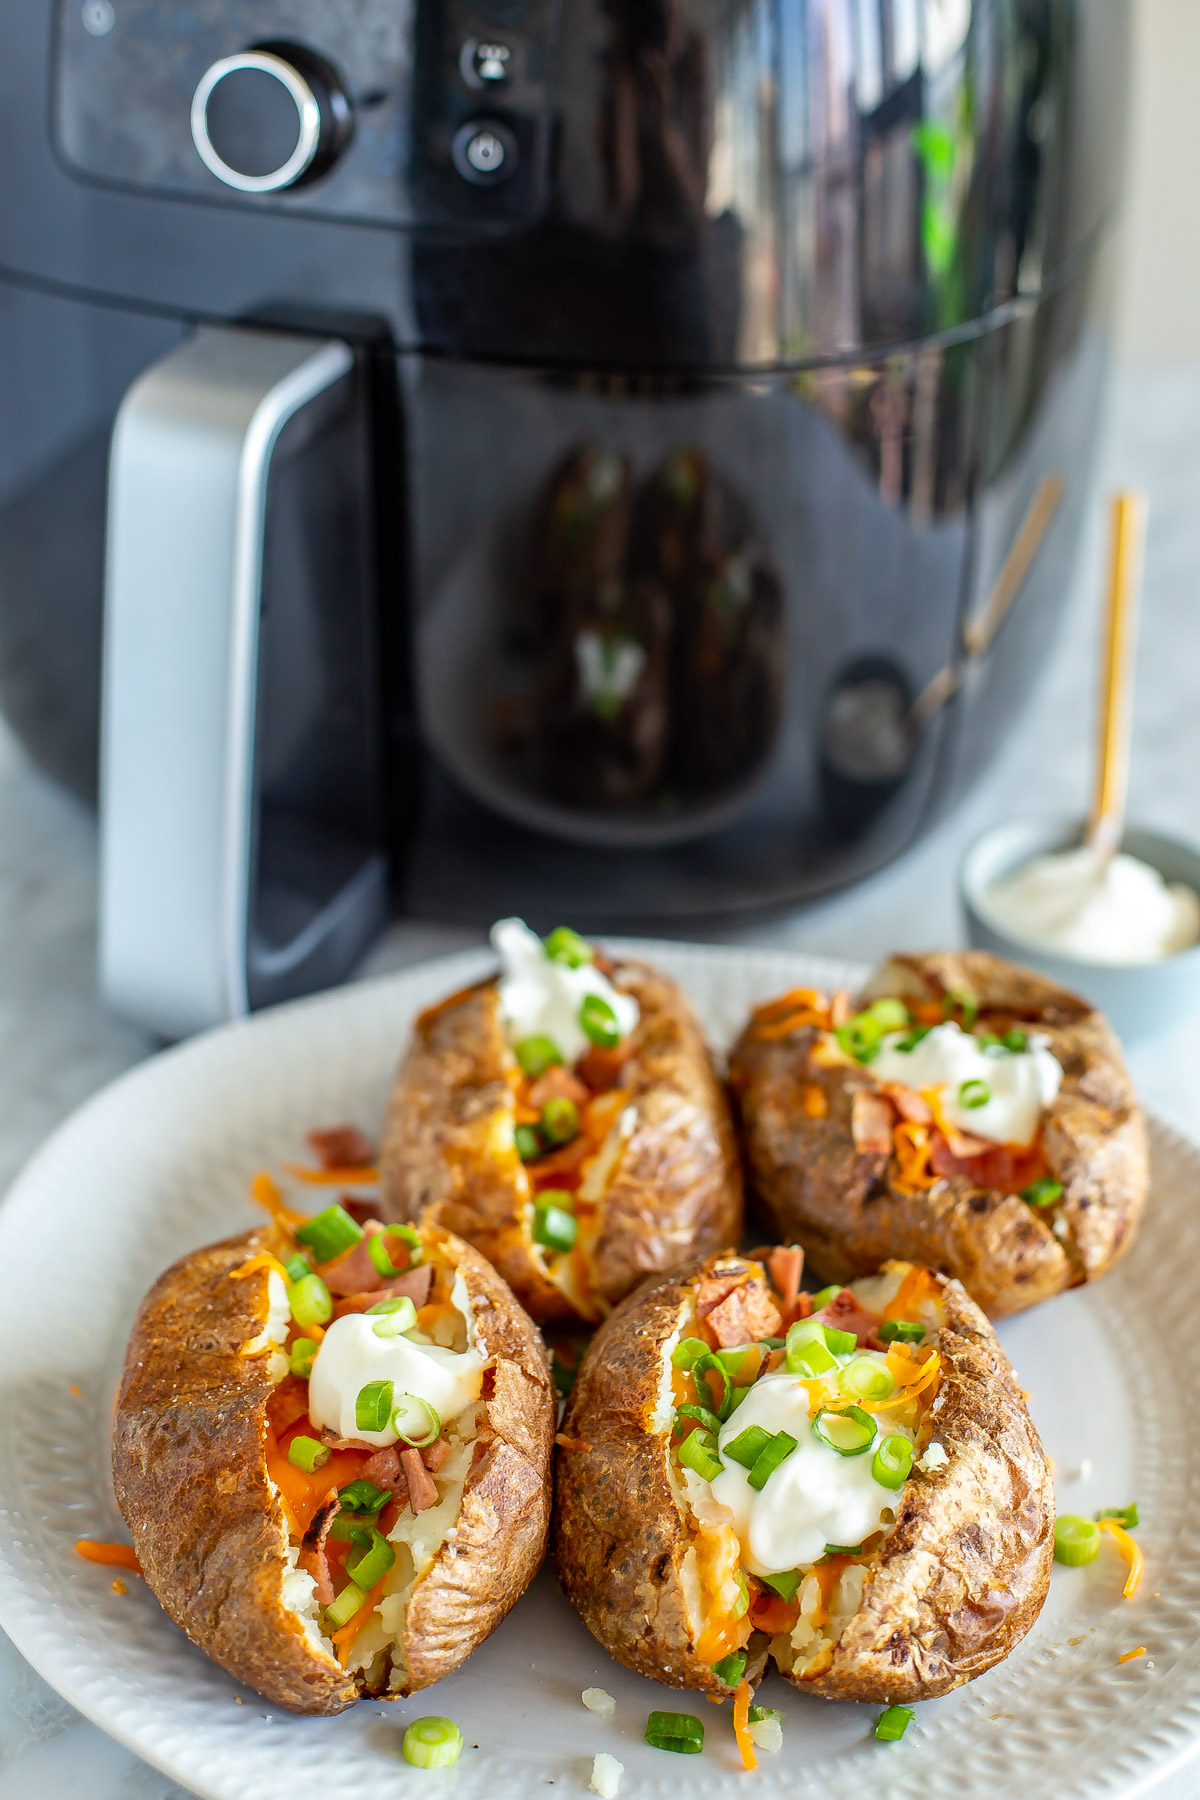 Four air fryer fully loaded baked potatoes in the foreground with an air fryer in the background.